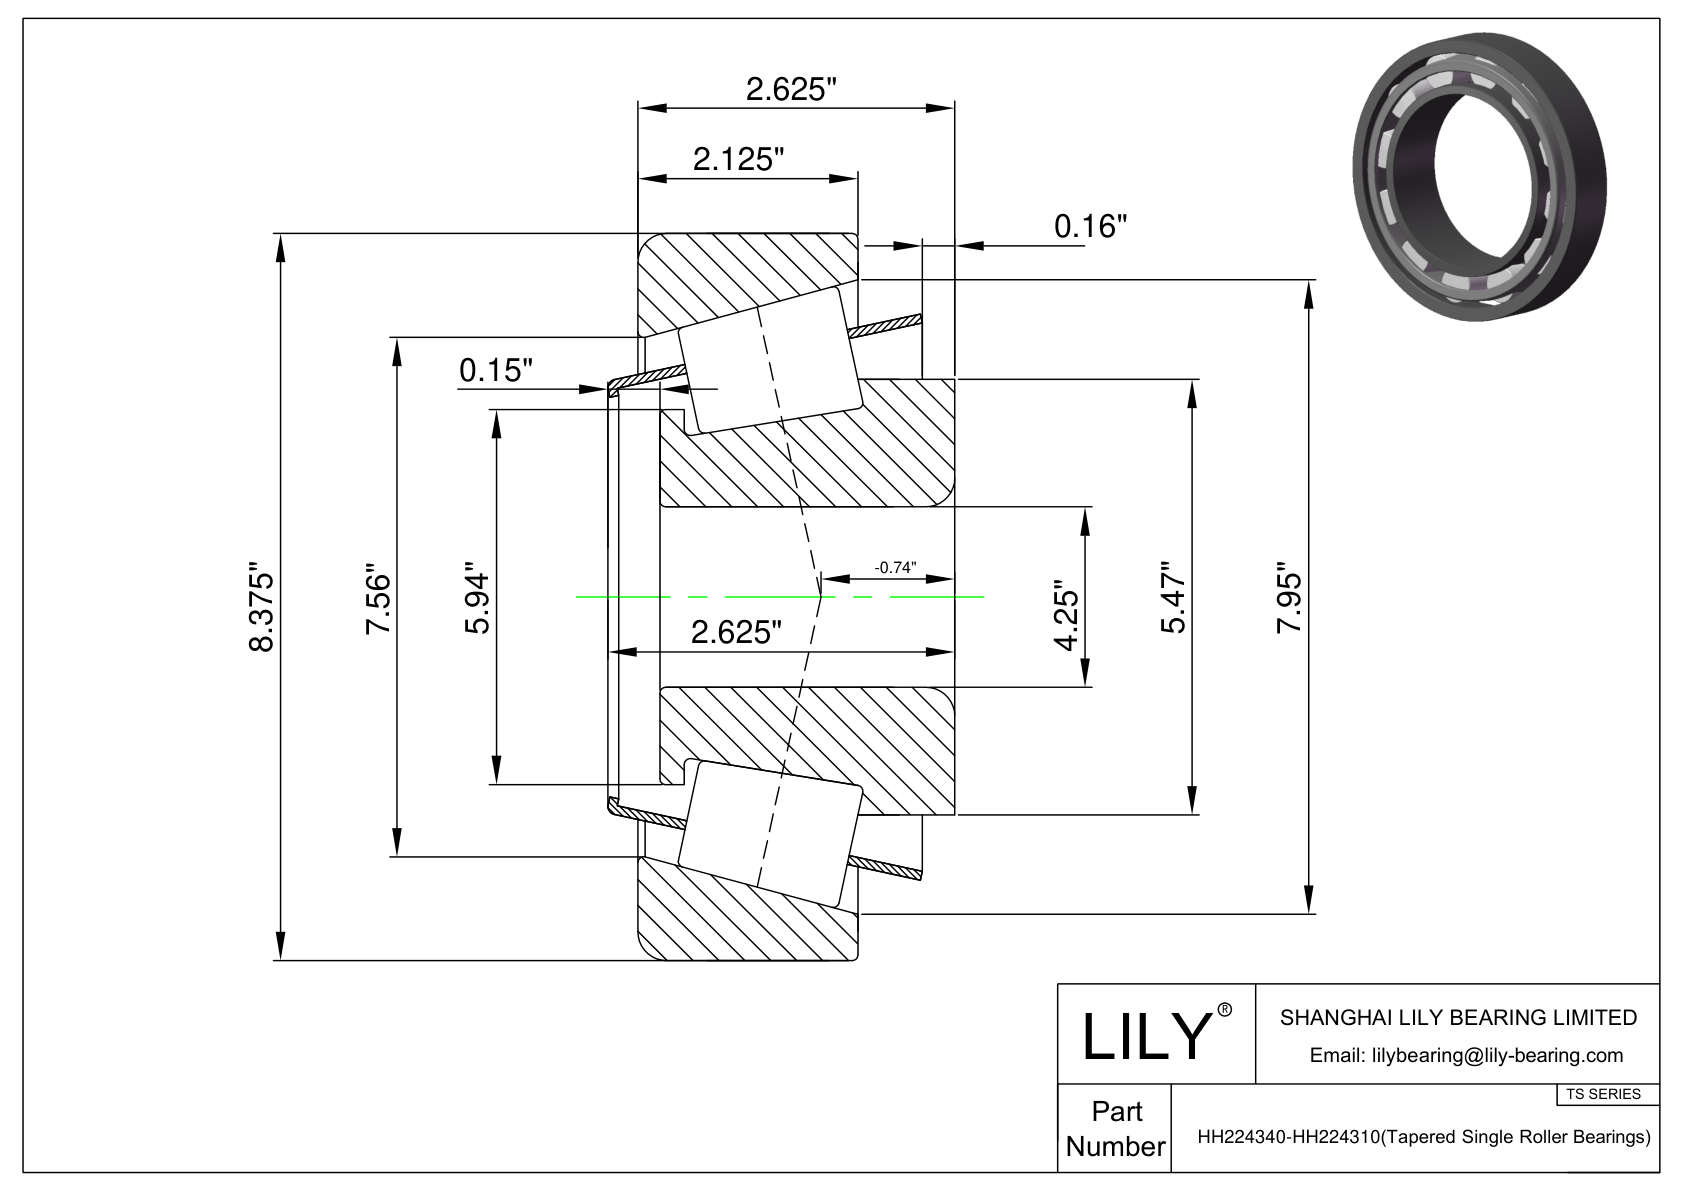 HH224340-HH224310 TS (Tapered Single Roller Bearings) (Imperial) cad drawing